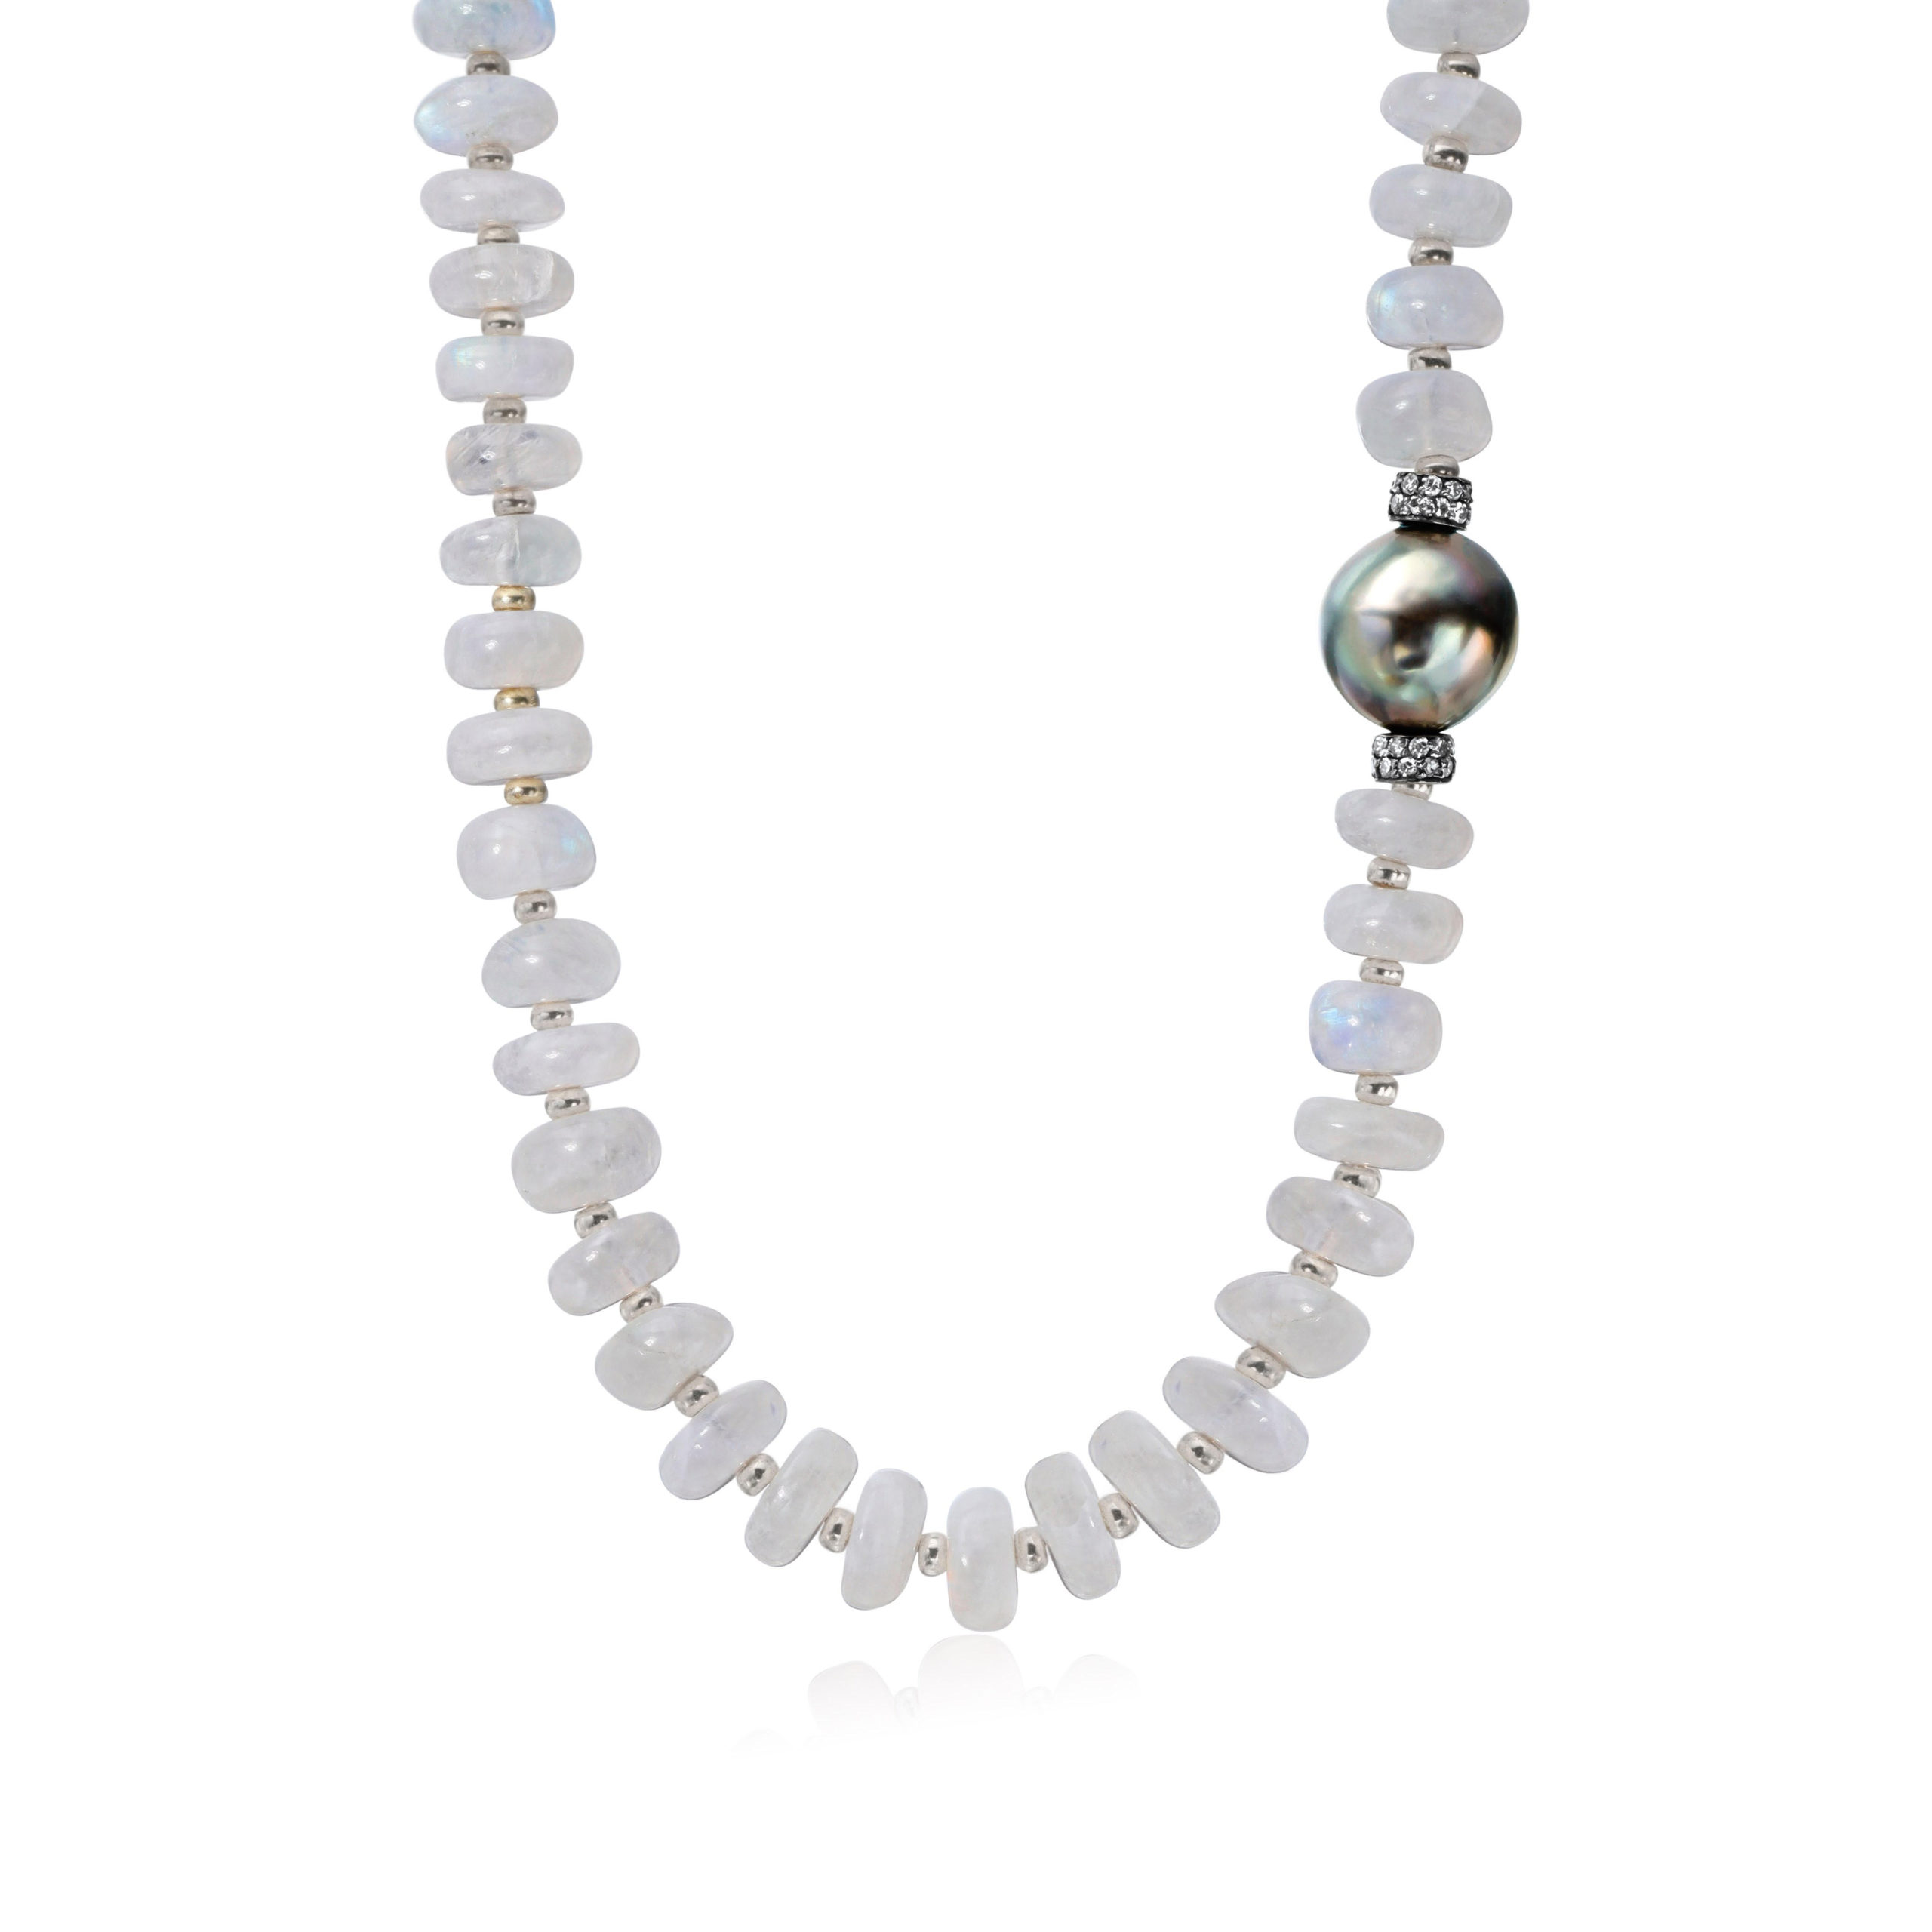 Moonstone necklace with diamond rondells and Tahitian pearl